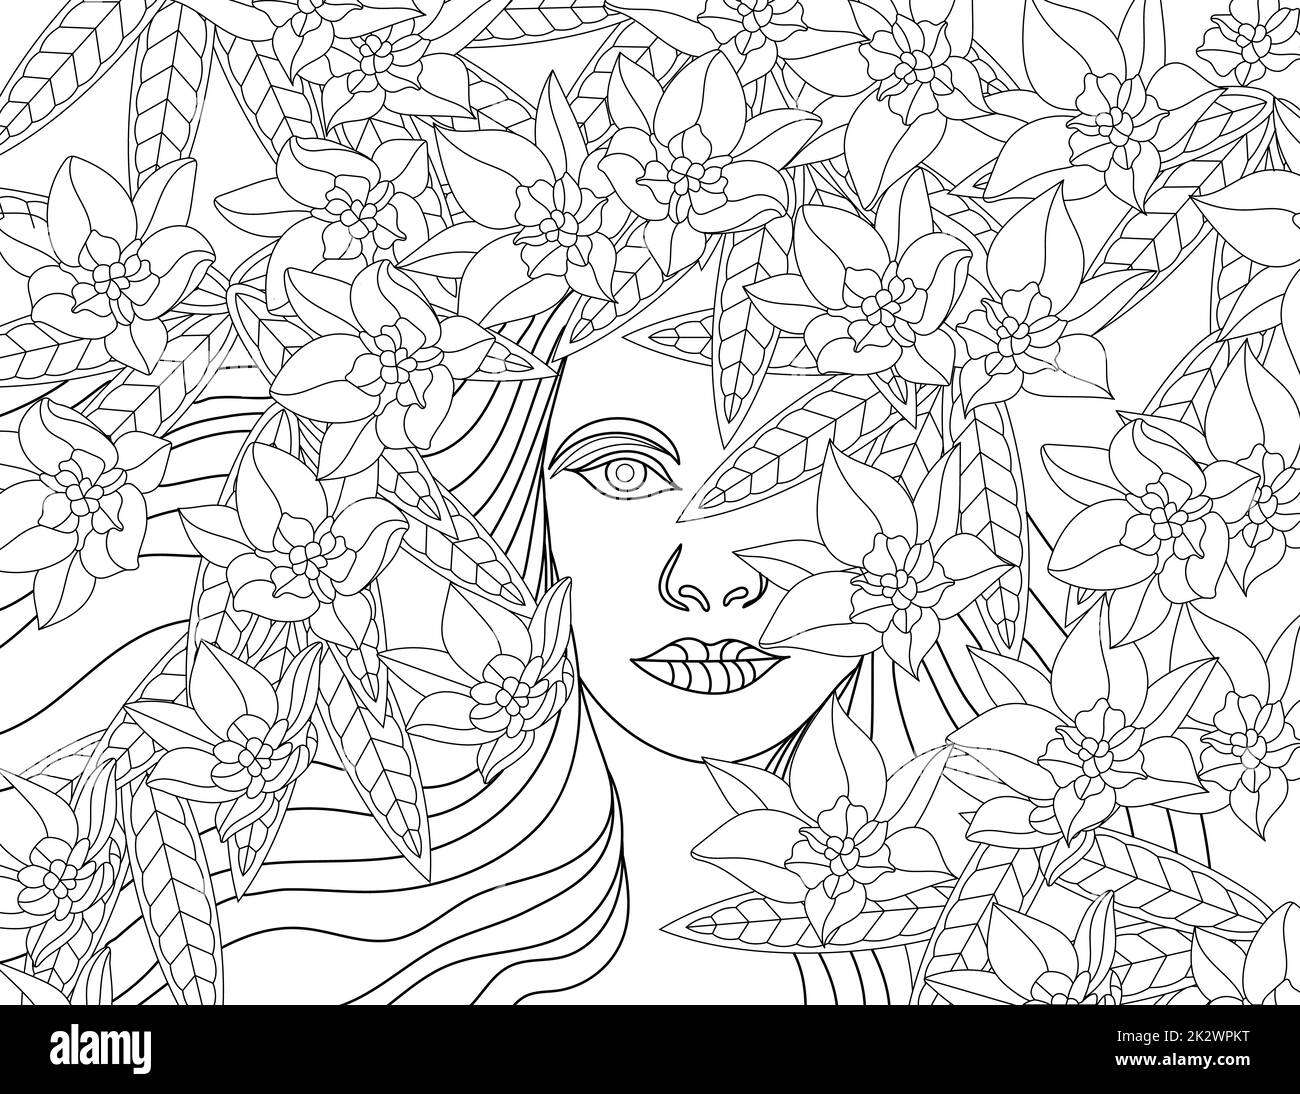 Vector line drawing girl flower crown flowy hair. Digital lineart image woman floral decoration hairstyle. Outline artwork design lady foliage adorned head. Stock Photo